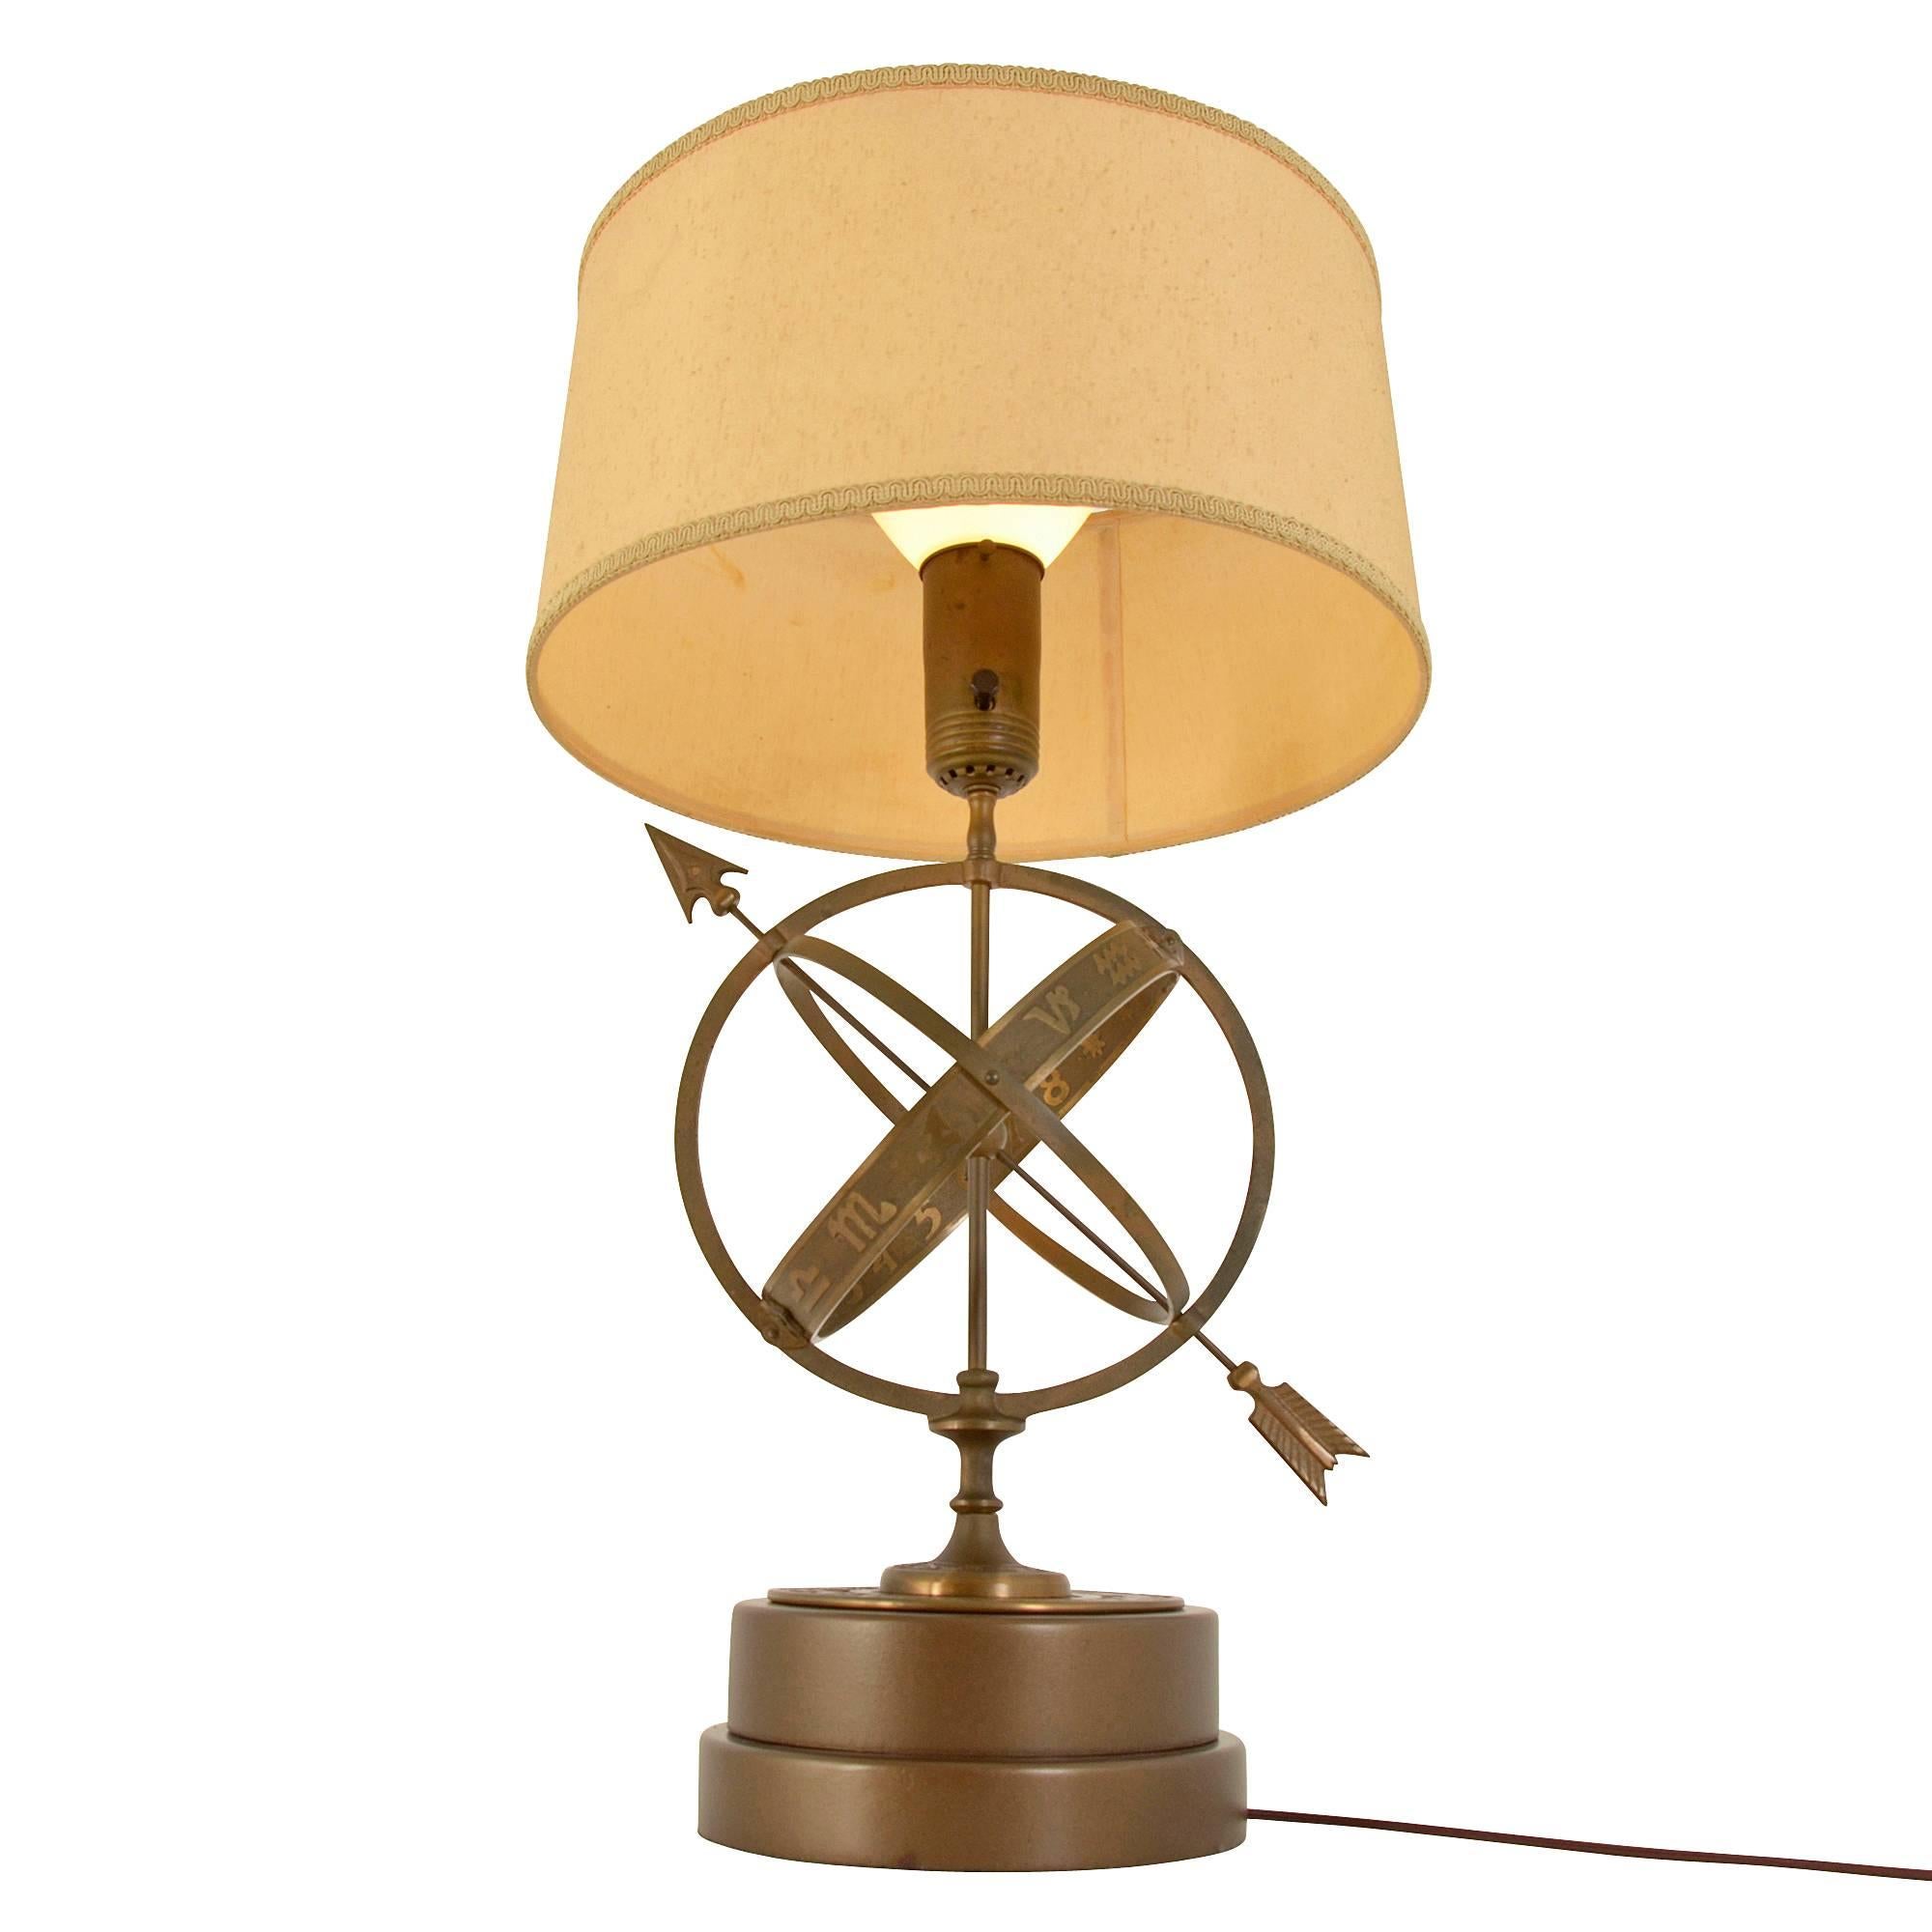 Possibly a creation of the Rembrandt Lamp Company of Baltimore, Maryland, this impressive and heavily bronze cast table lamp features a three-layered armillary. The central loop shows Roman symbols of the zodiac on the outside and numbers on the